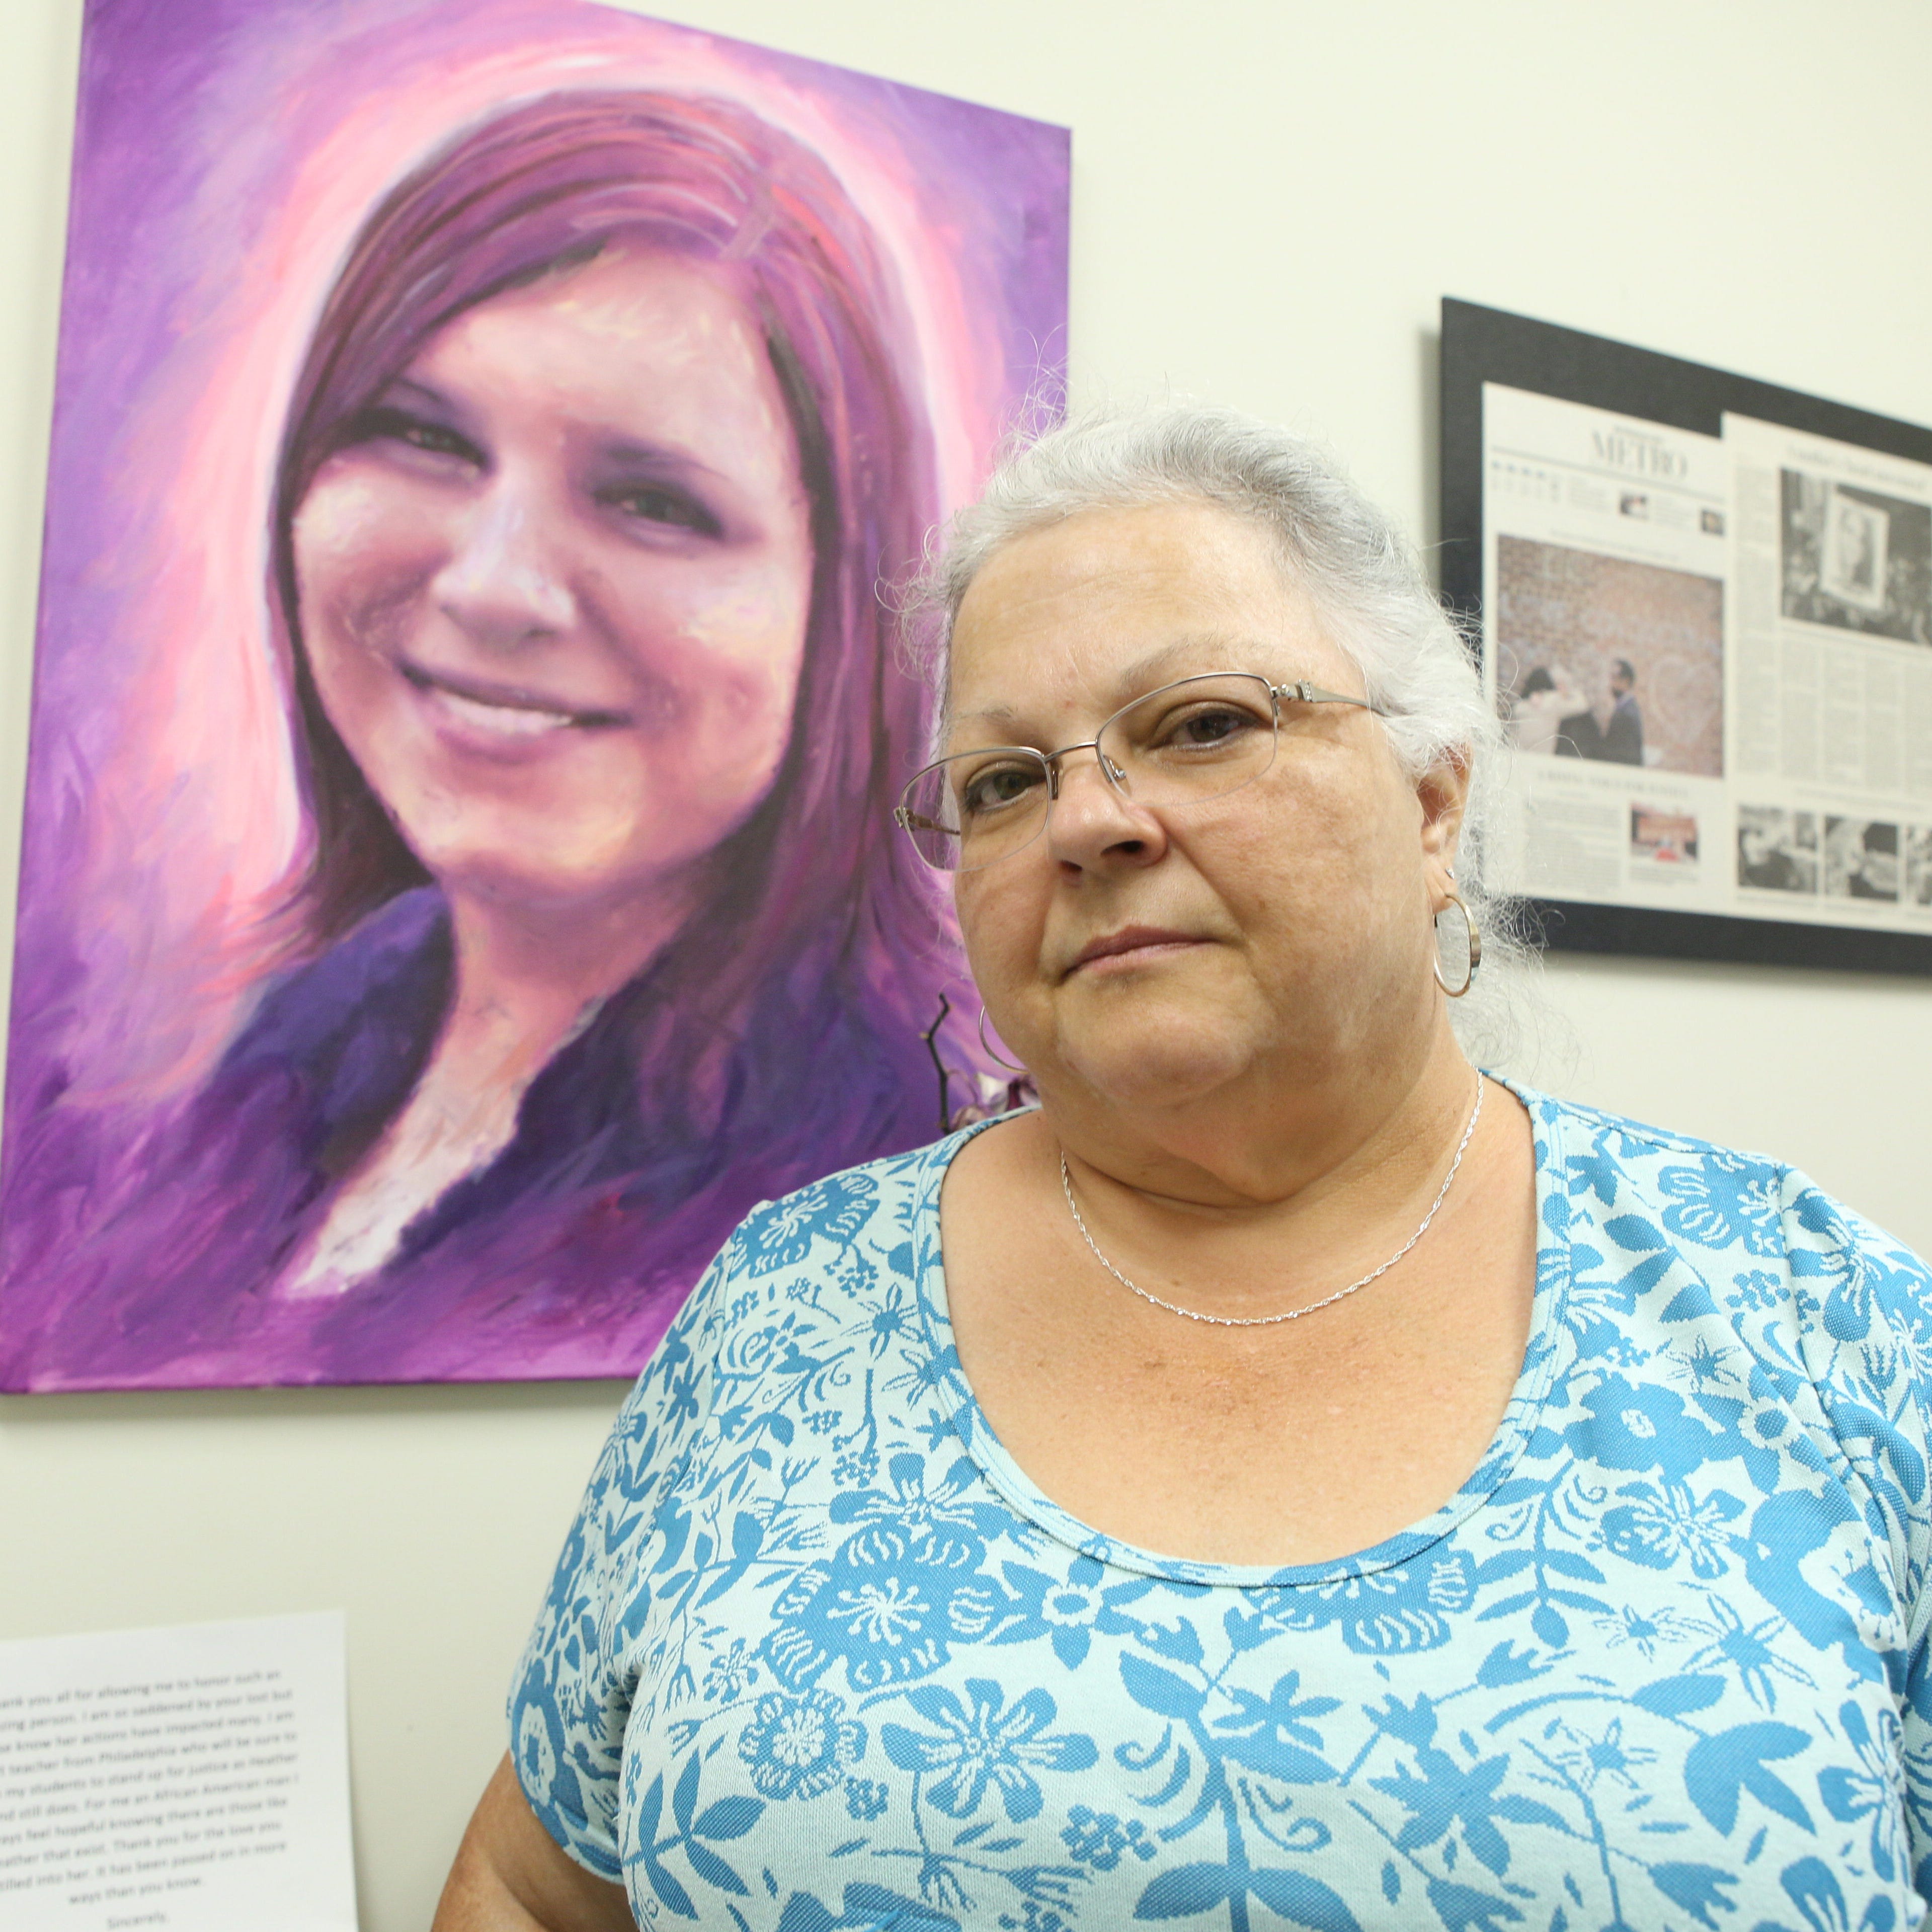 Susan Bro, the mother of Heather Heyer, who was killed in Charlottesville after being struck by a vehicle during the white nationalist riots, poses for a portrait in a room in Heyer's old law office, where her charitable foundation is now headquarter